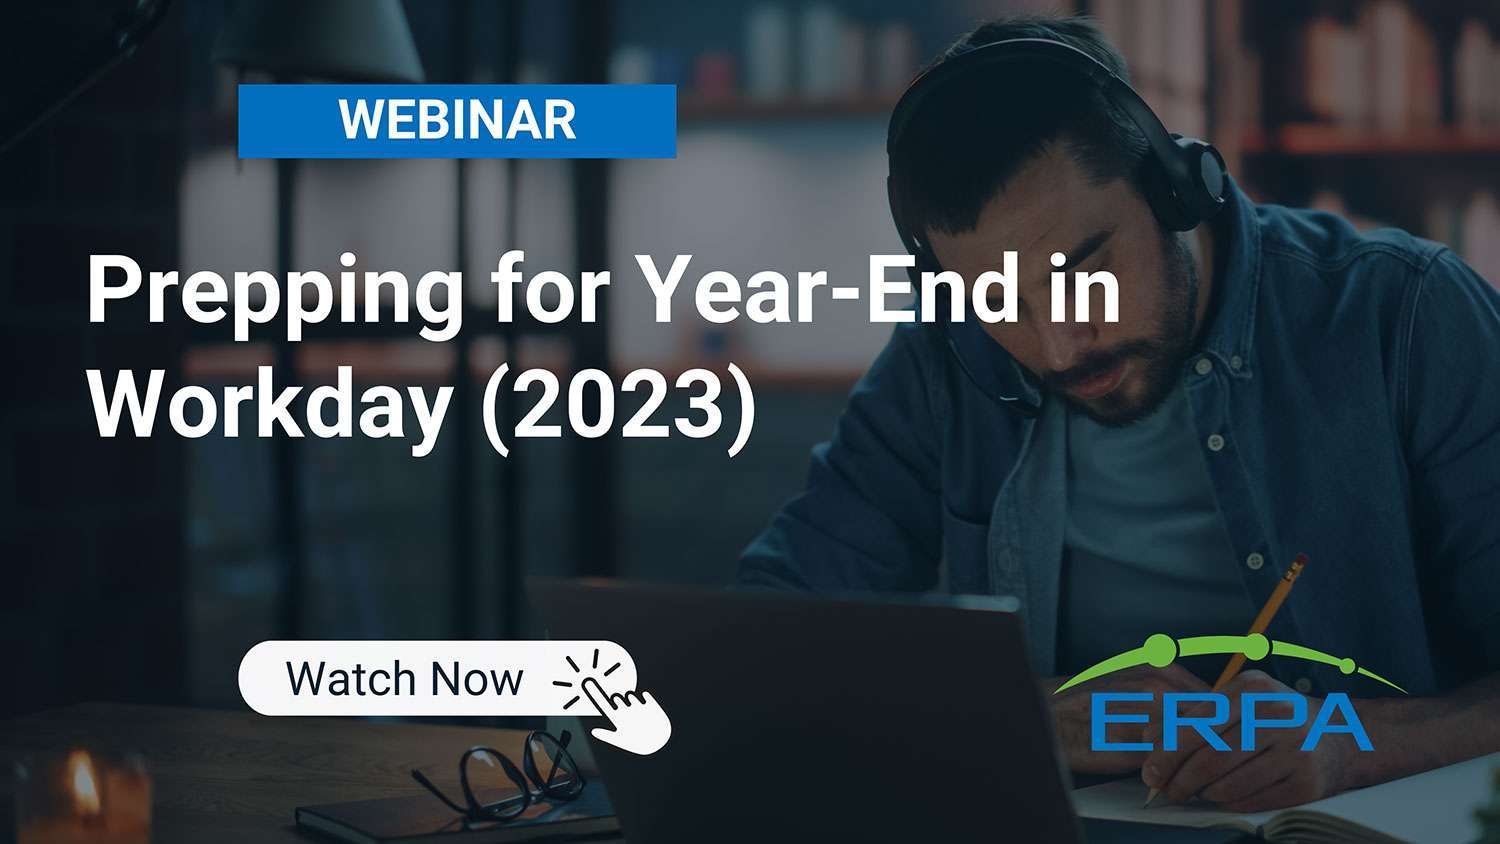 ERPA-Webinar: Prepping for Year-End in Workday for 2023